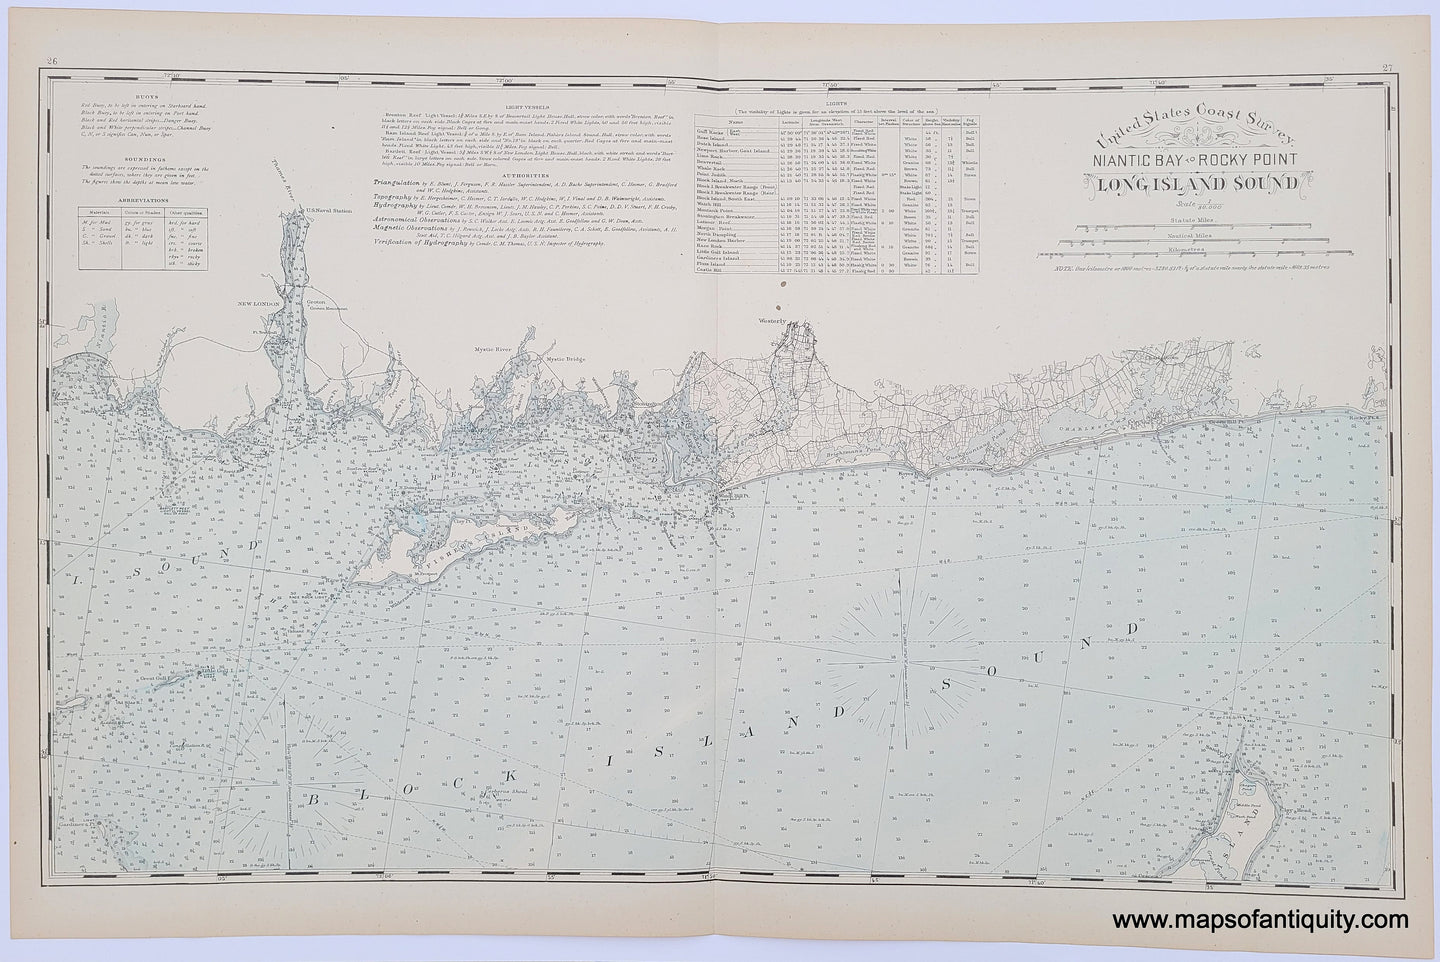 Antique-Hand-Colored-Map-United-States-Coast-Survey-Niantic-Bay-to-Rocky-Point-Long-Island-Sound--******-Connecticut-Antique-Nautical-Charts-1893-Hurd-Maps-Of-Antiquity